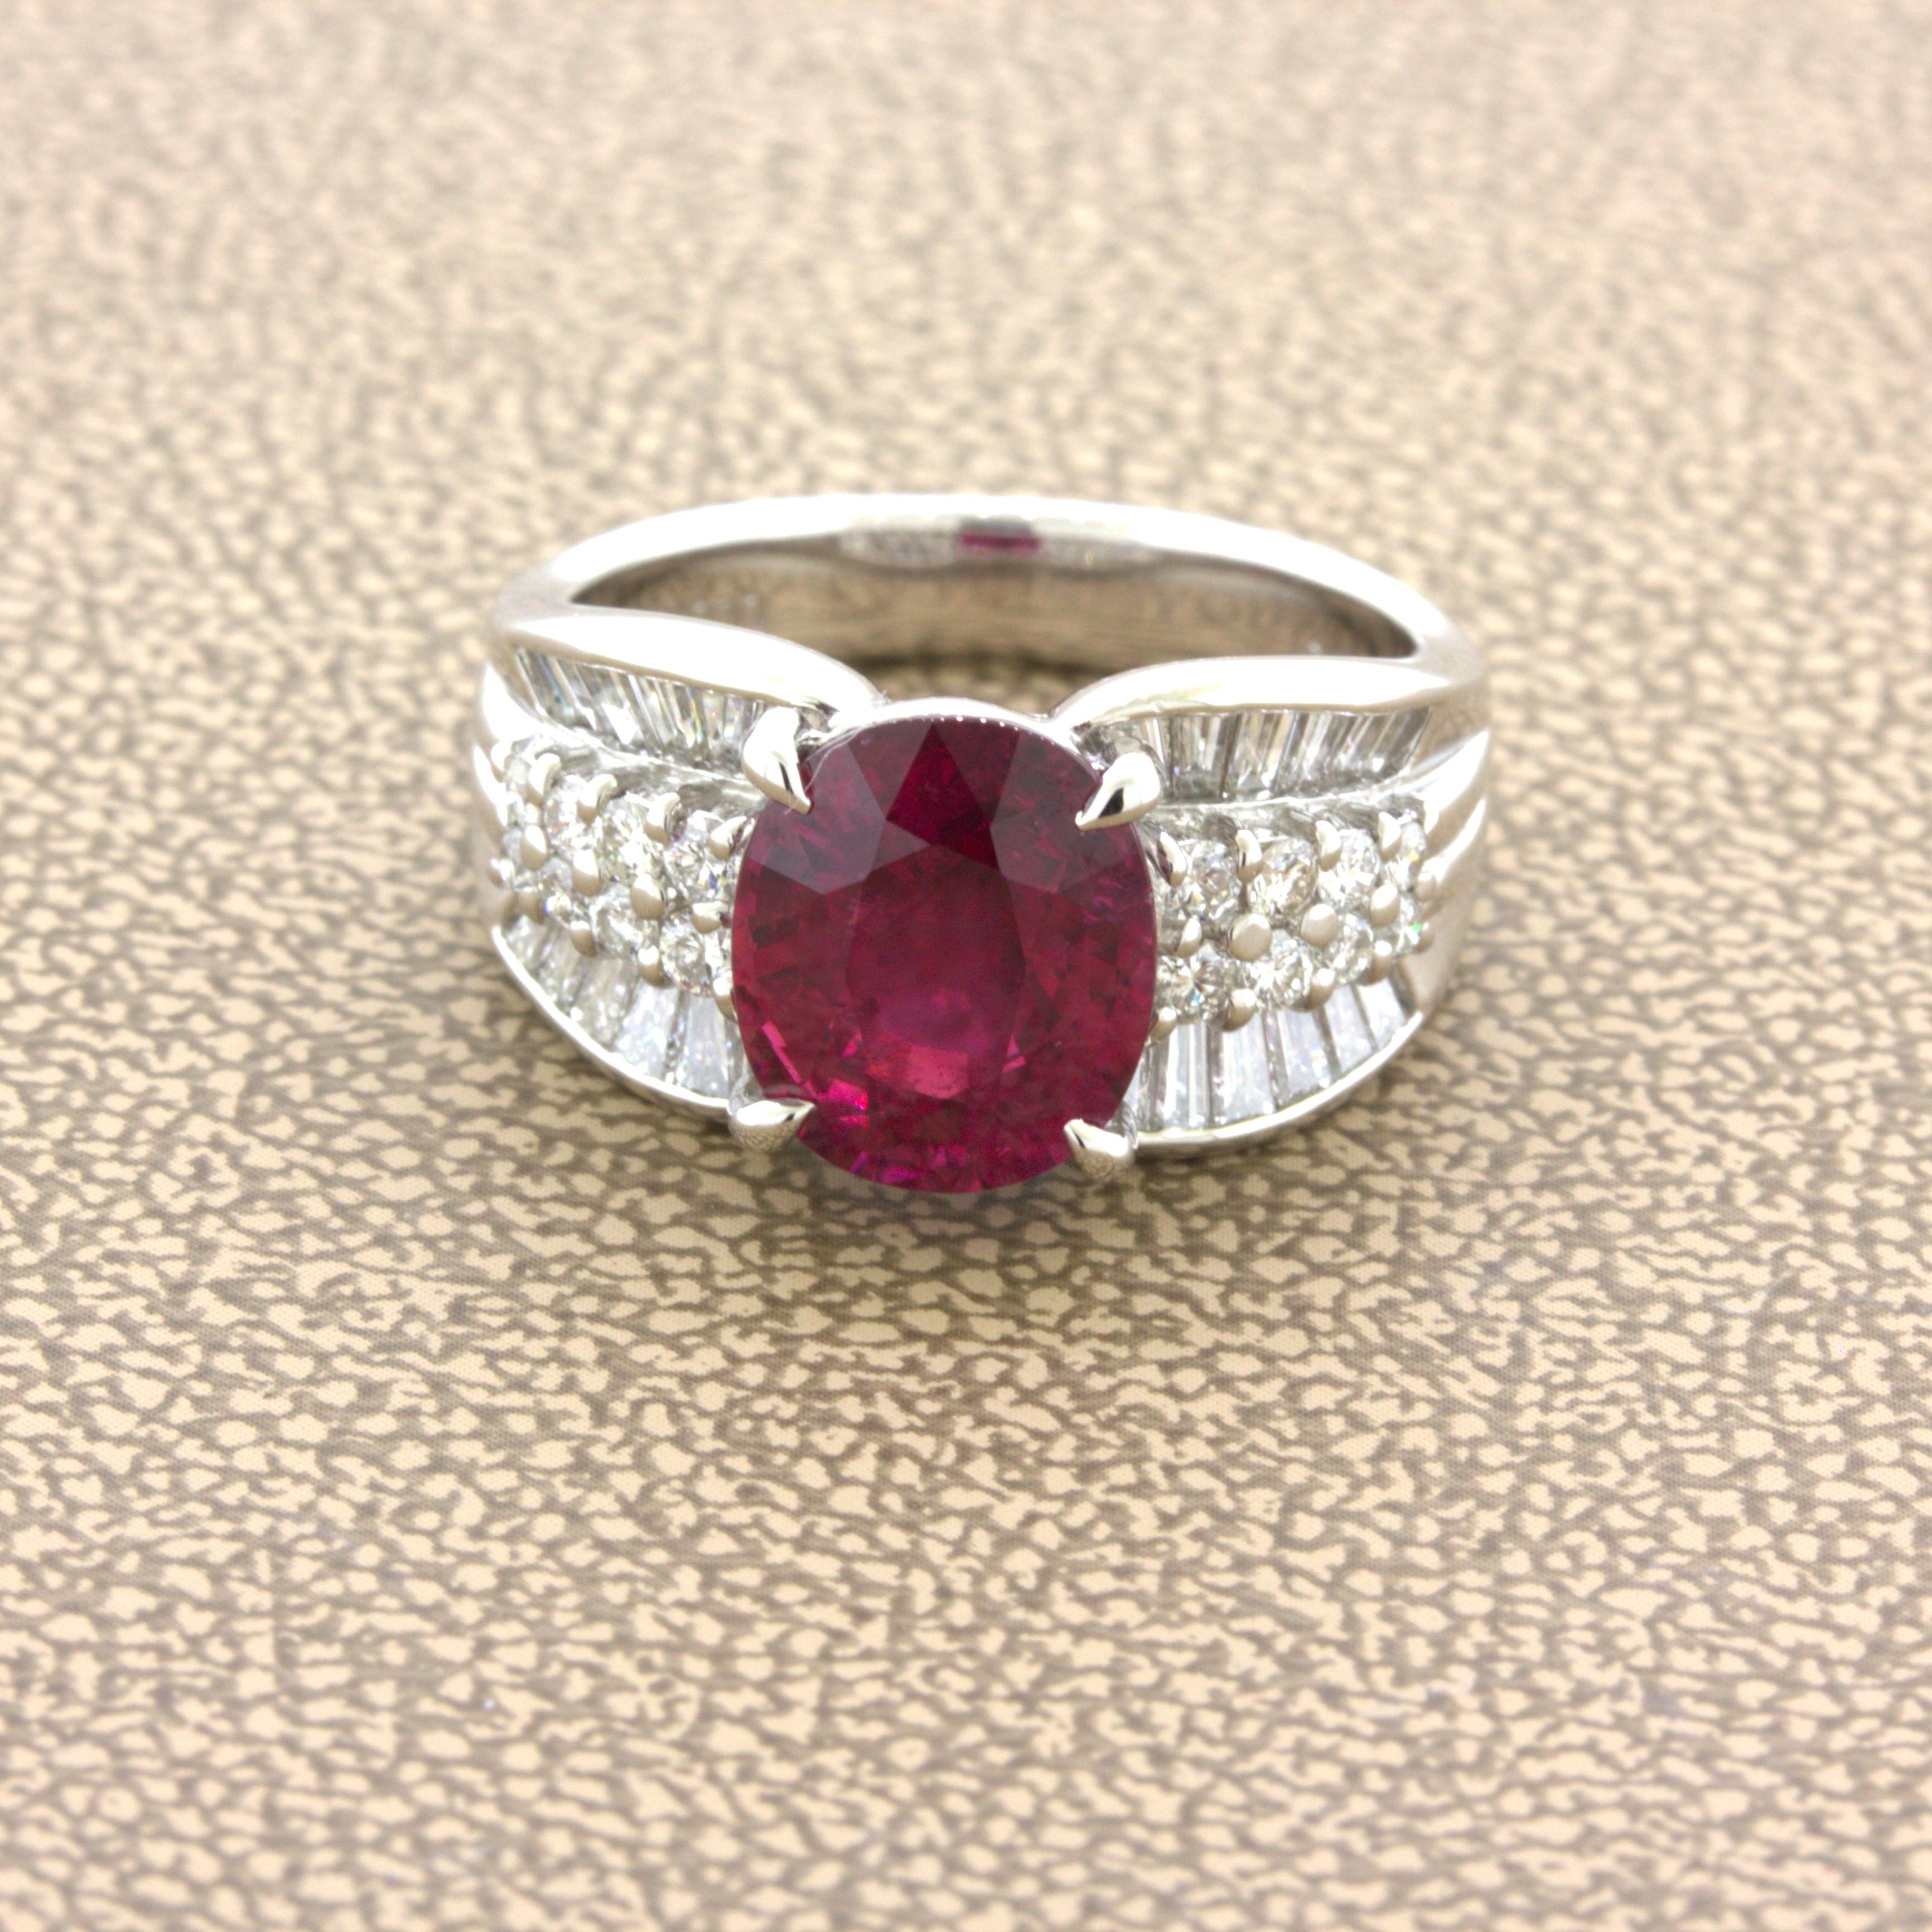 A fine and very rare gem ruby takes center stage. Rubies of fine quality are very difficult to source. Even stones weighing 1-2 carats with fine quality can be a challenge for collectors to find. Here we have a 4.05 carat ruby with fantastic